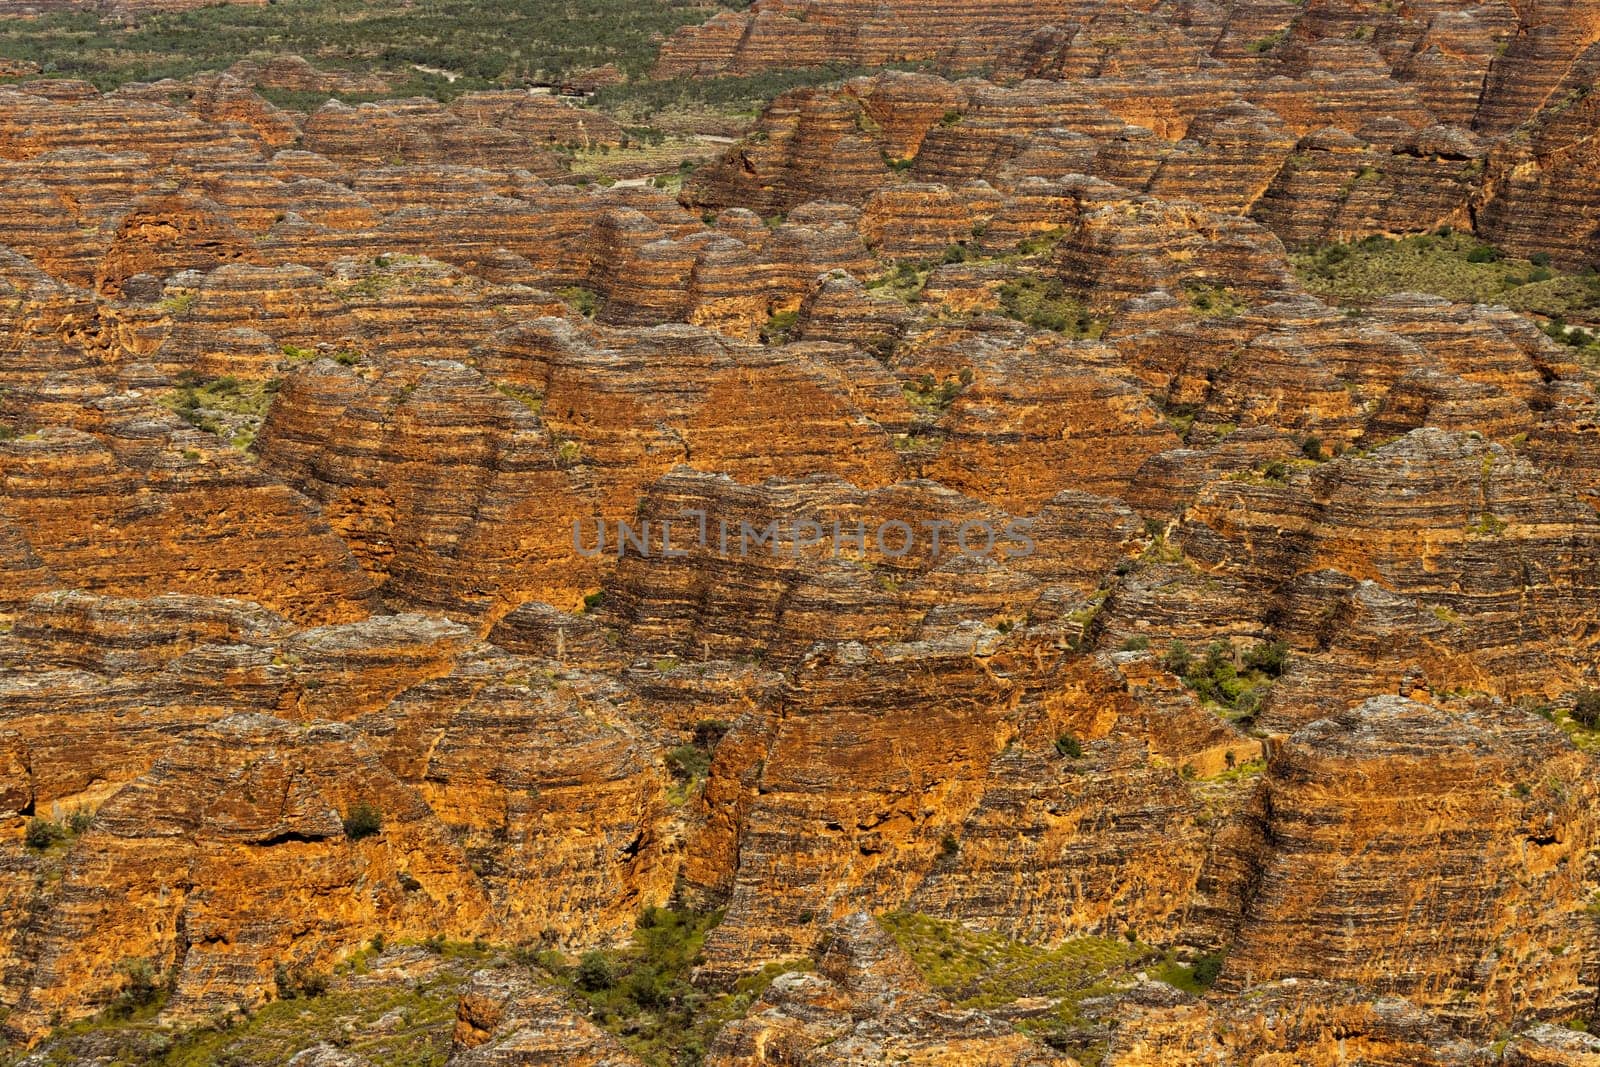 Famous domes of the Bungle Bungles Purnululu national park, western Australia by StefanMal